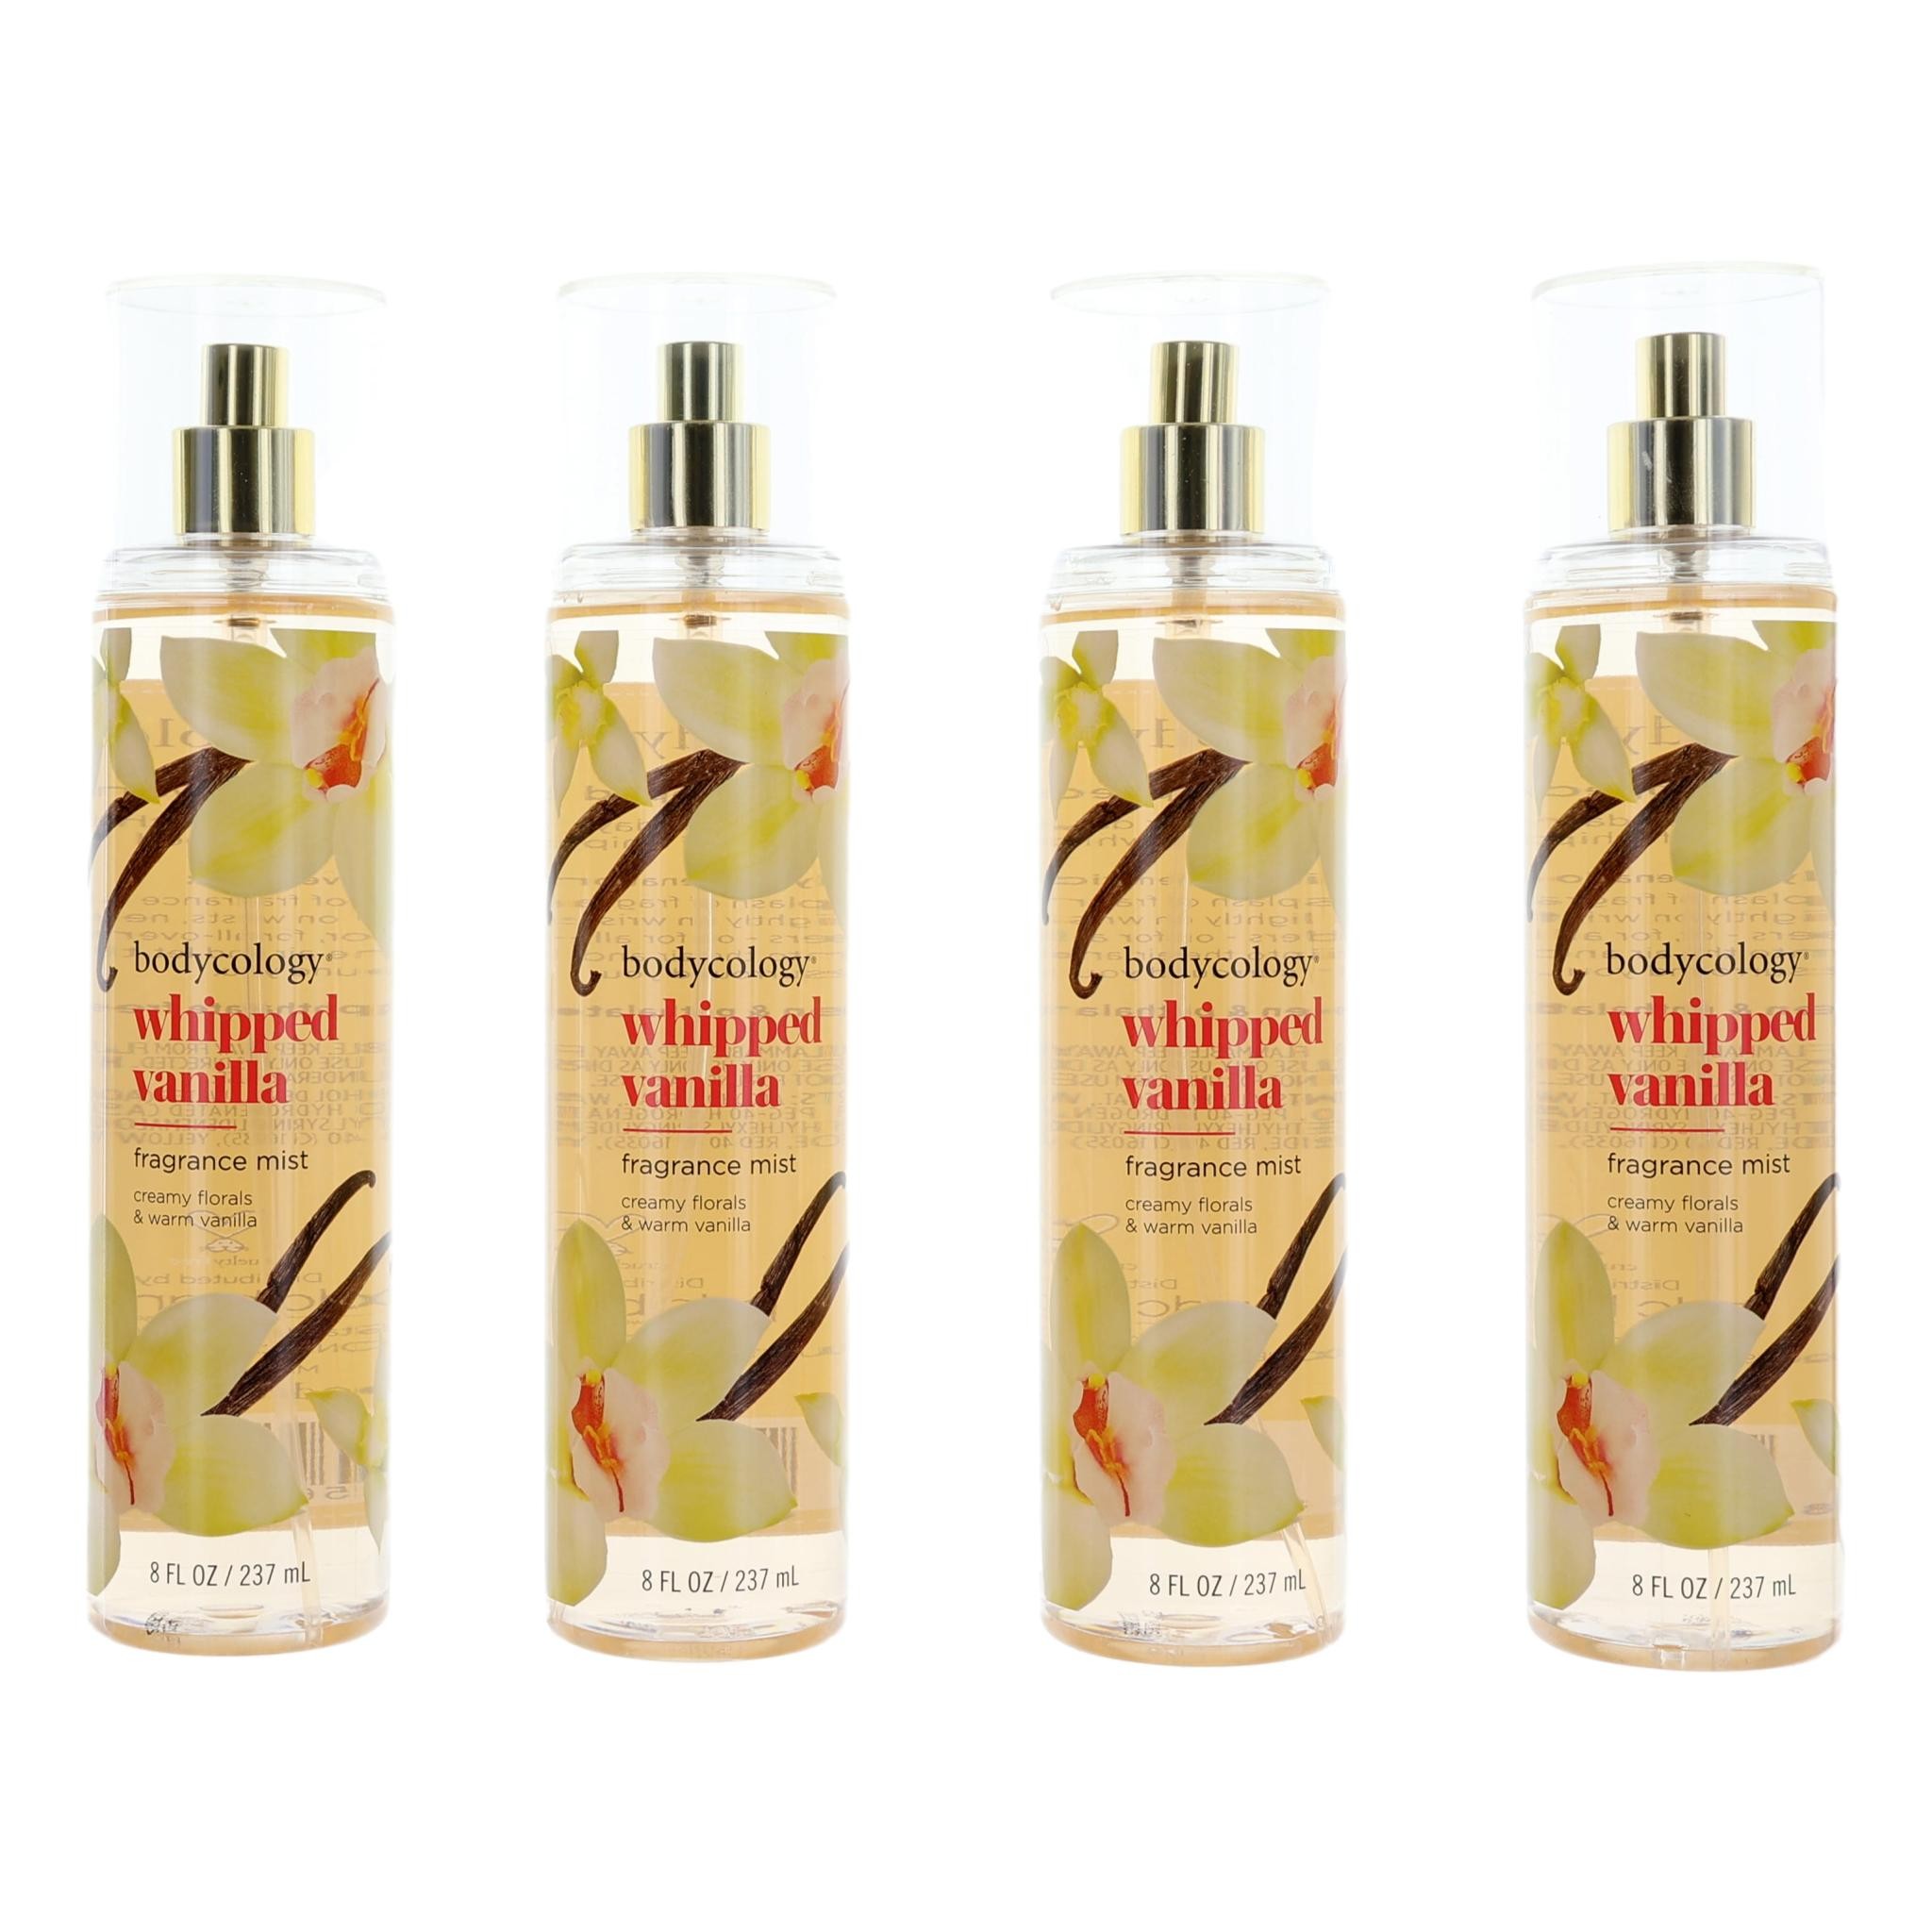 Bodycology Whipped Vanilla by Bodycology, 4 Pack of 8 oz Fragrance Mist for Women